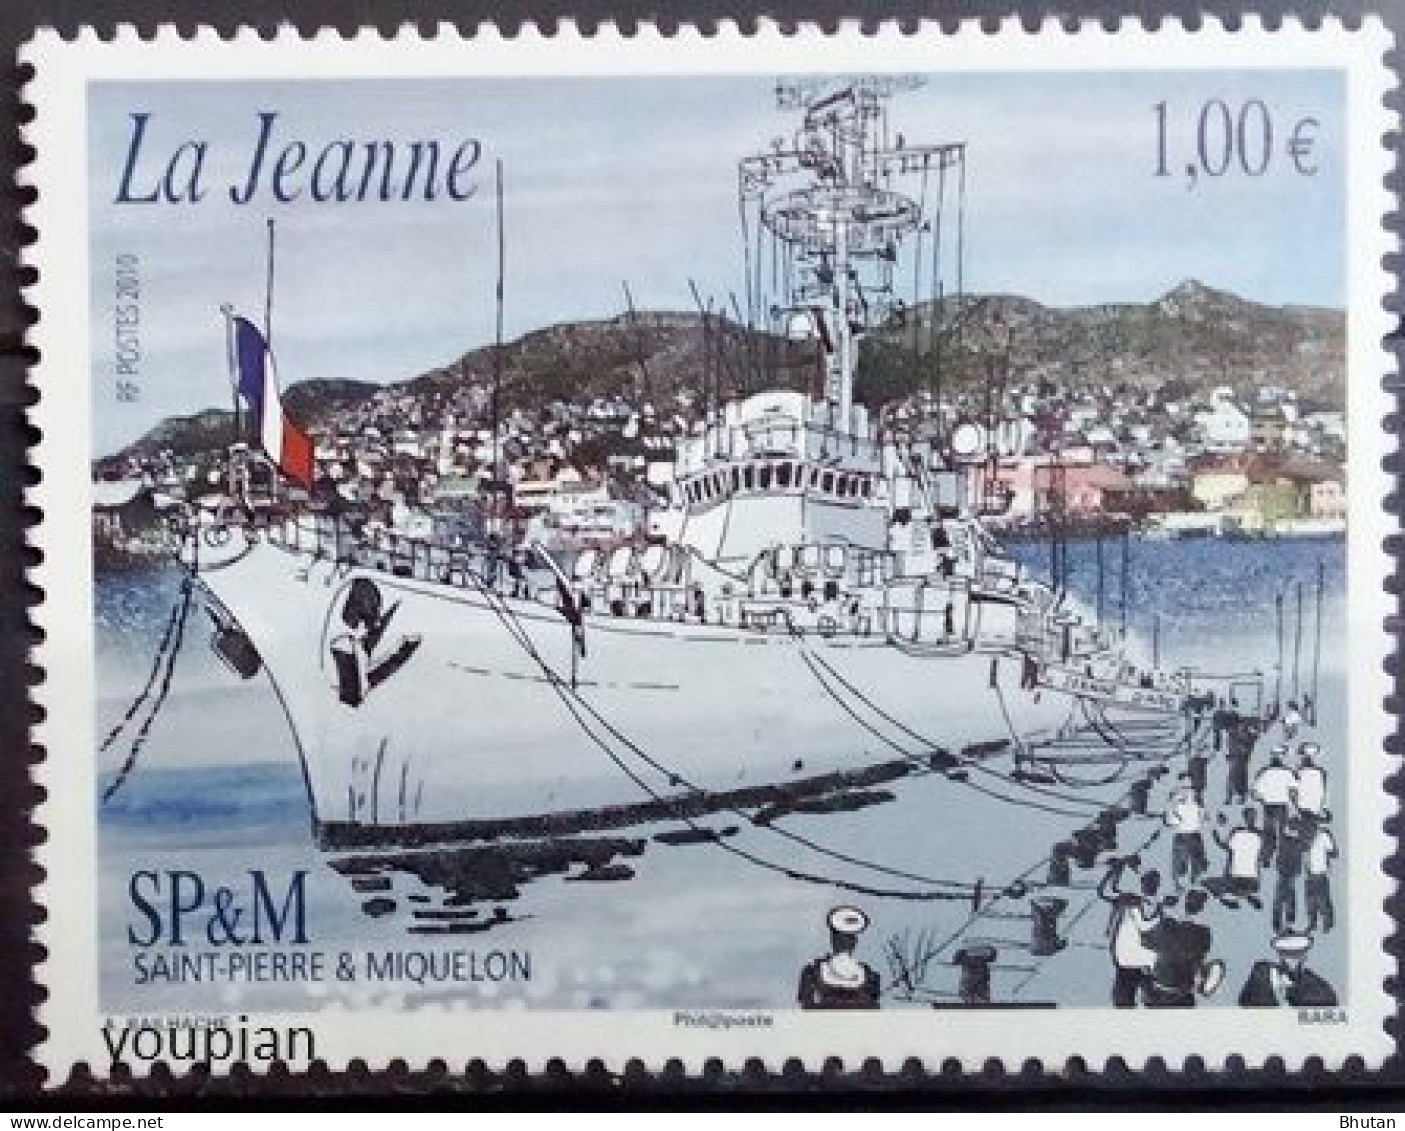 St. Pierre And Miquelon 2010, La Jeanne Navy, MNH Single Stamp - Unused Stamps